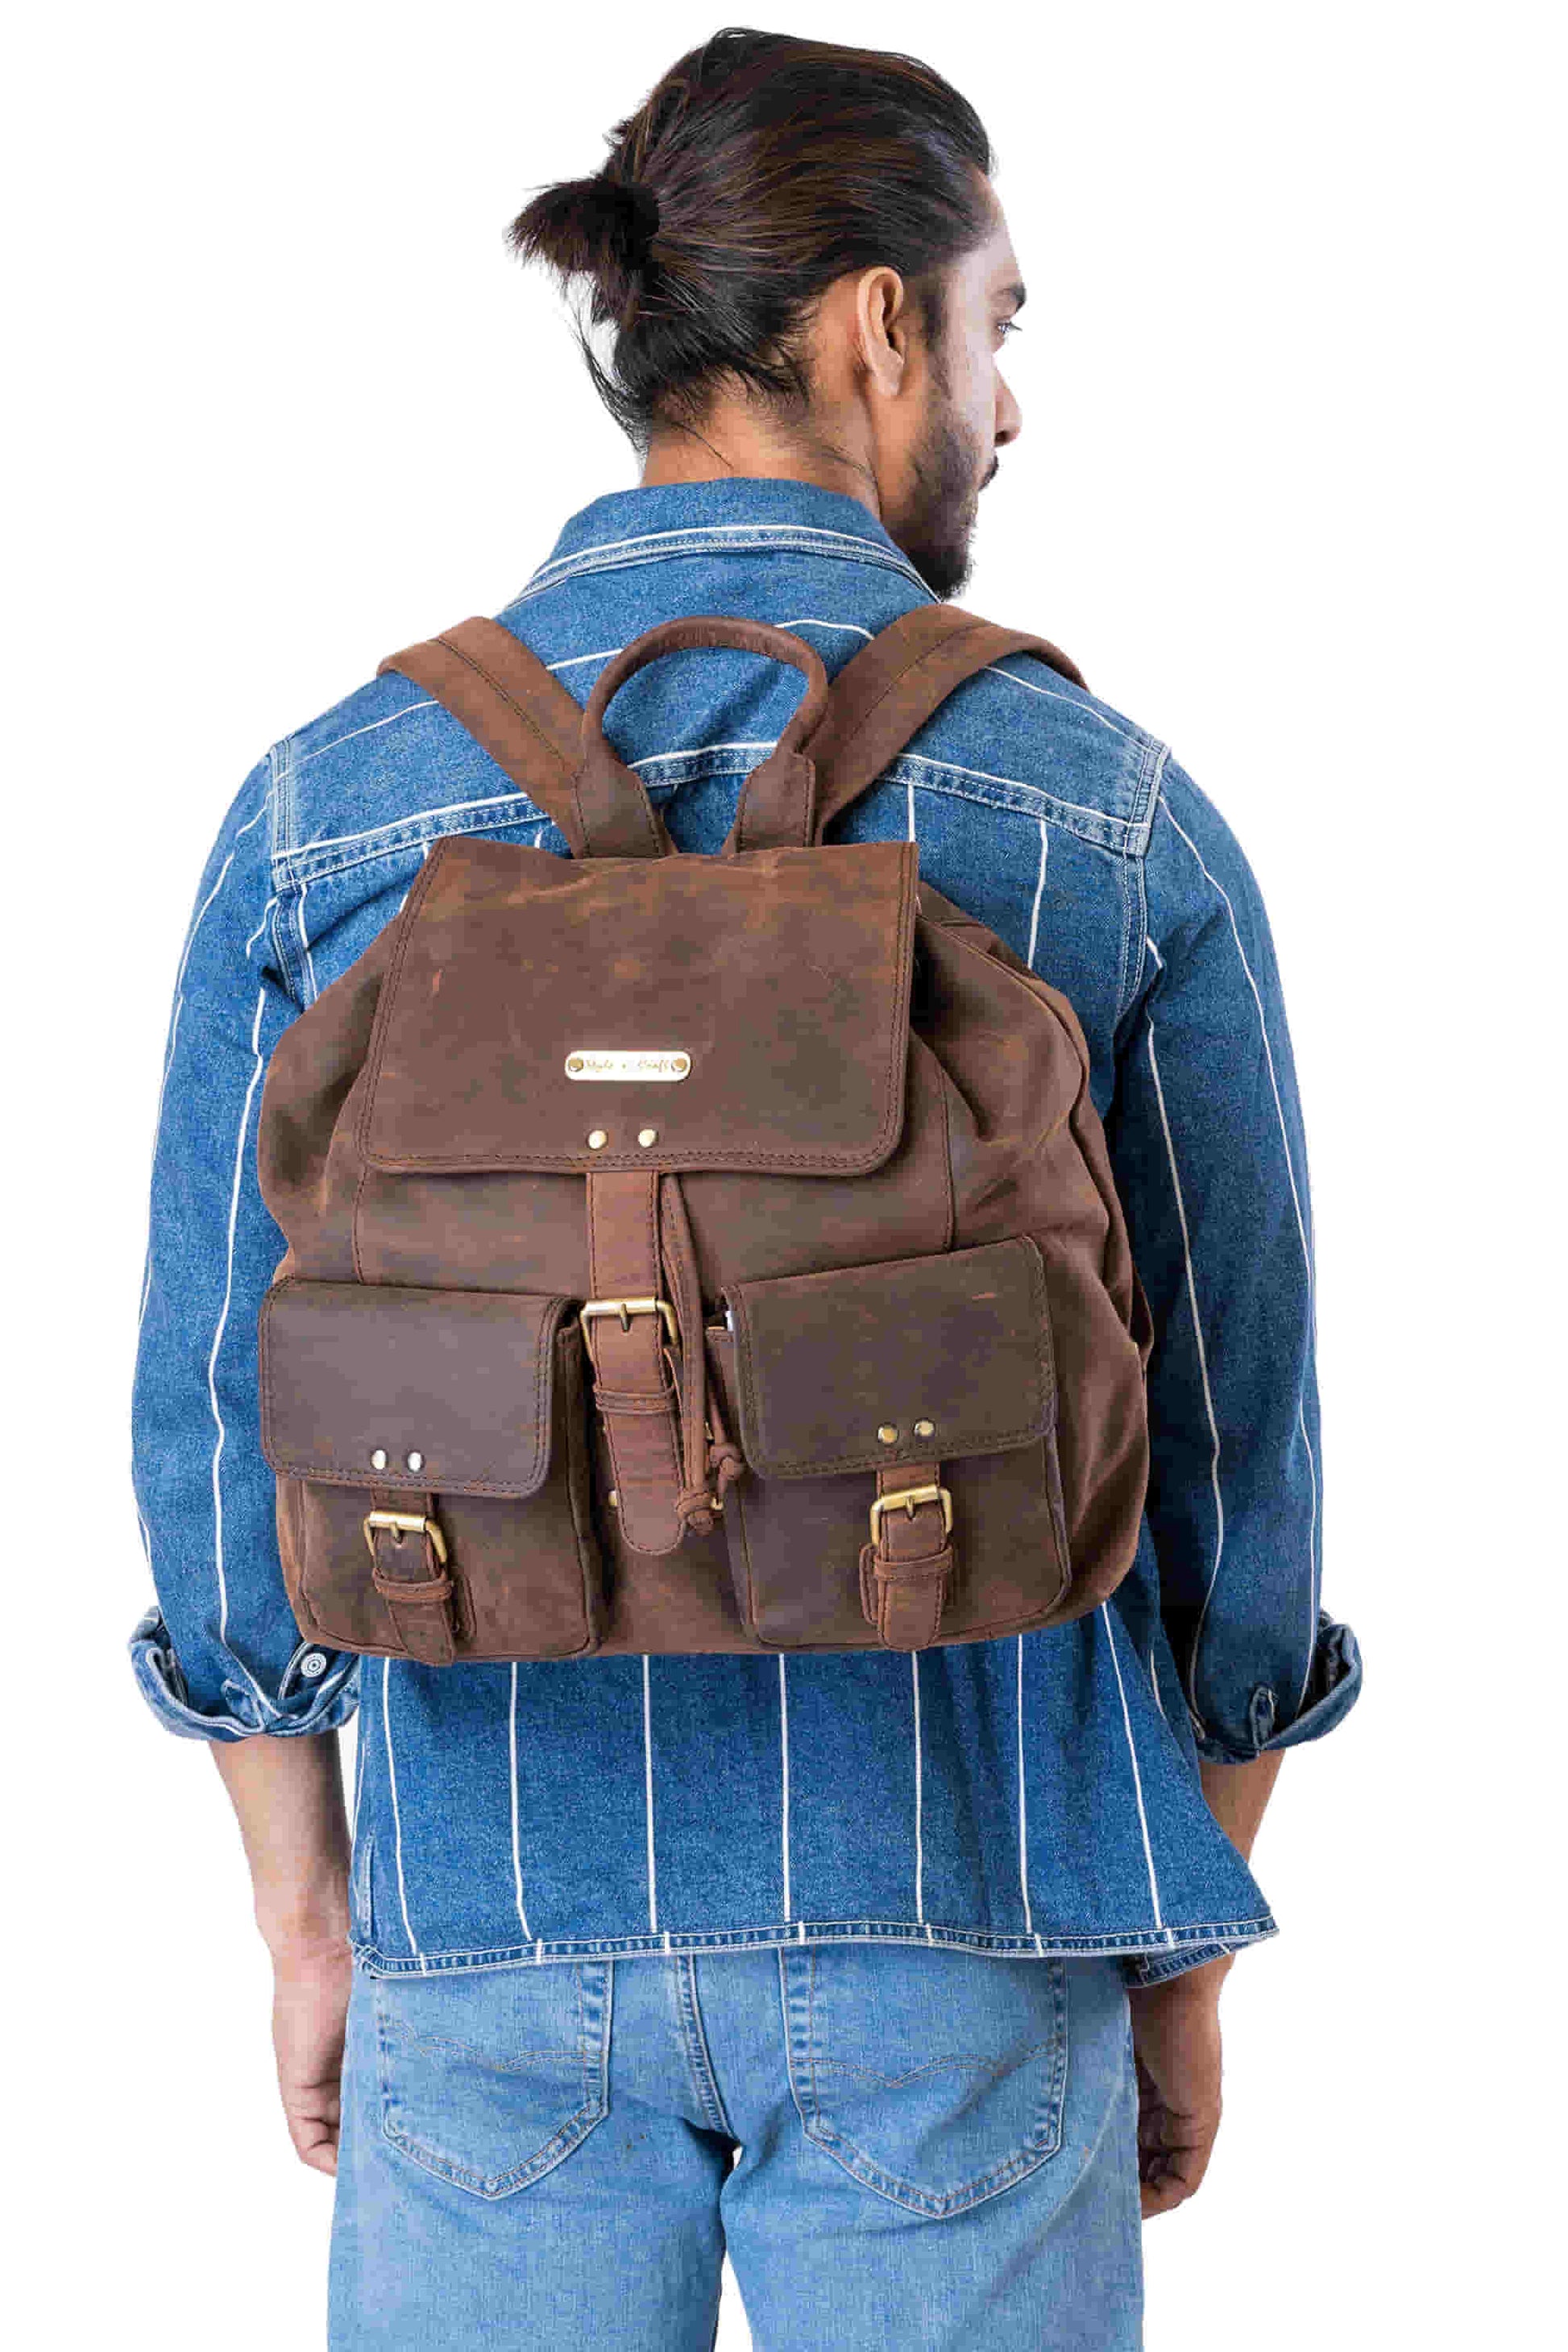 Style n Craft 392650 Backpack in Full Grain Dark Brown Hunter Leather - in use - carrying the backpack on the back using the leather shoulder straps